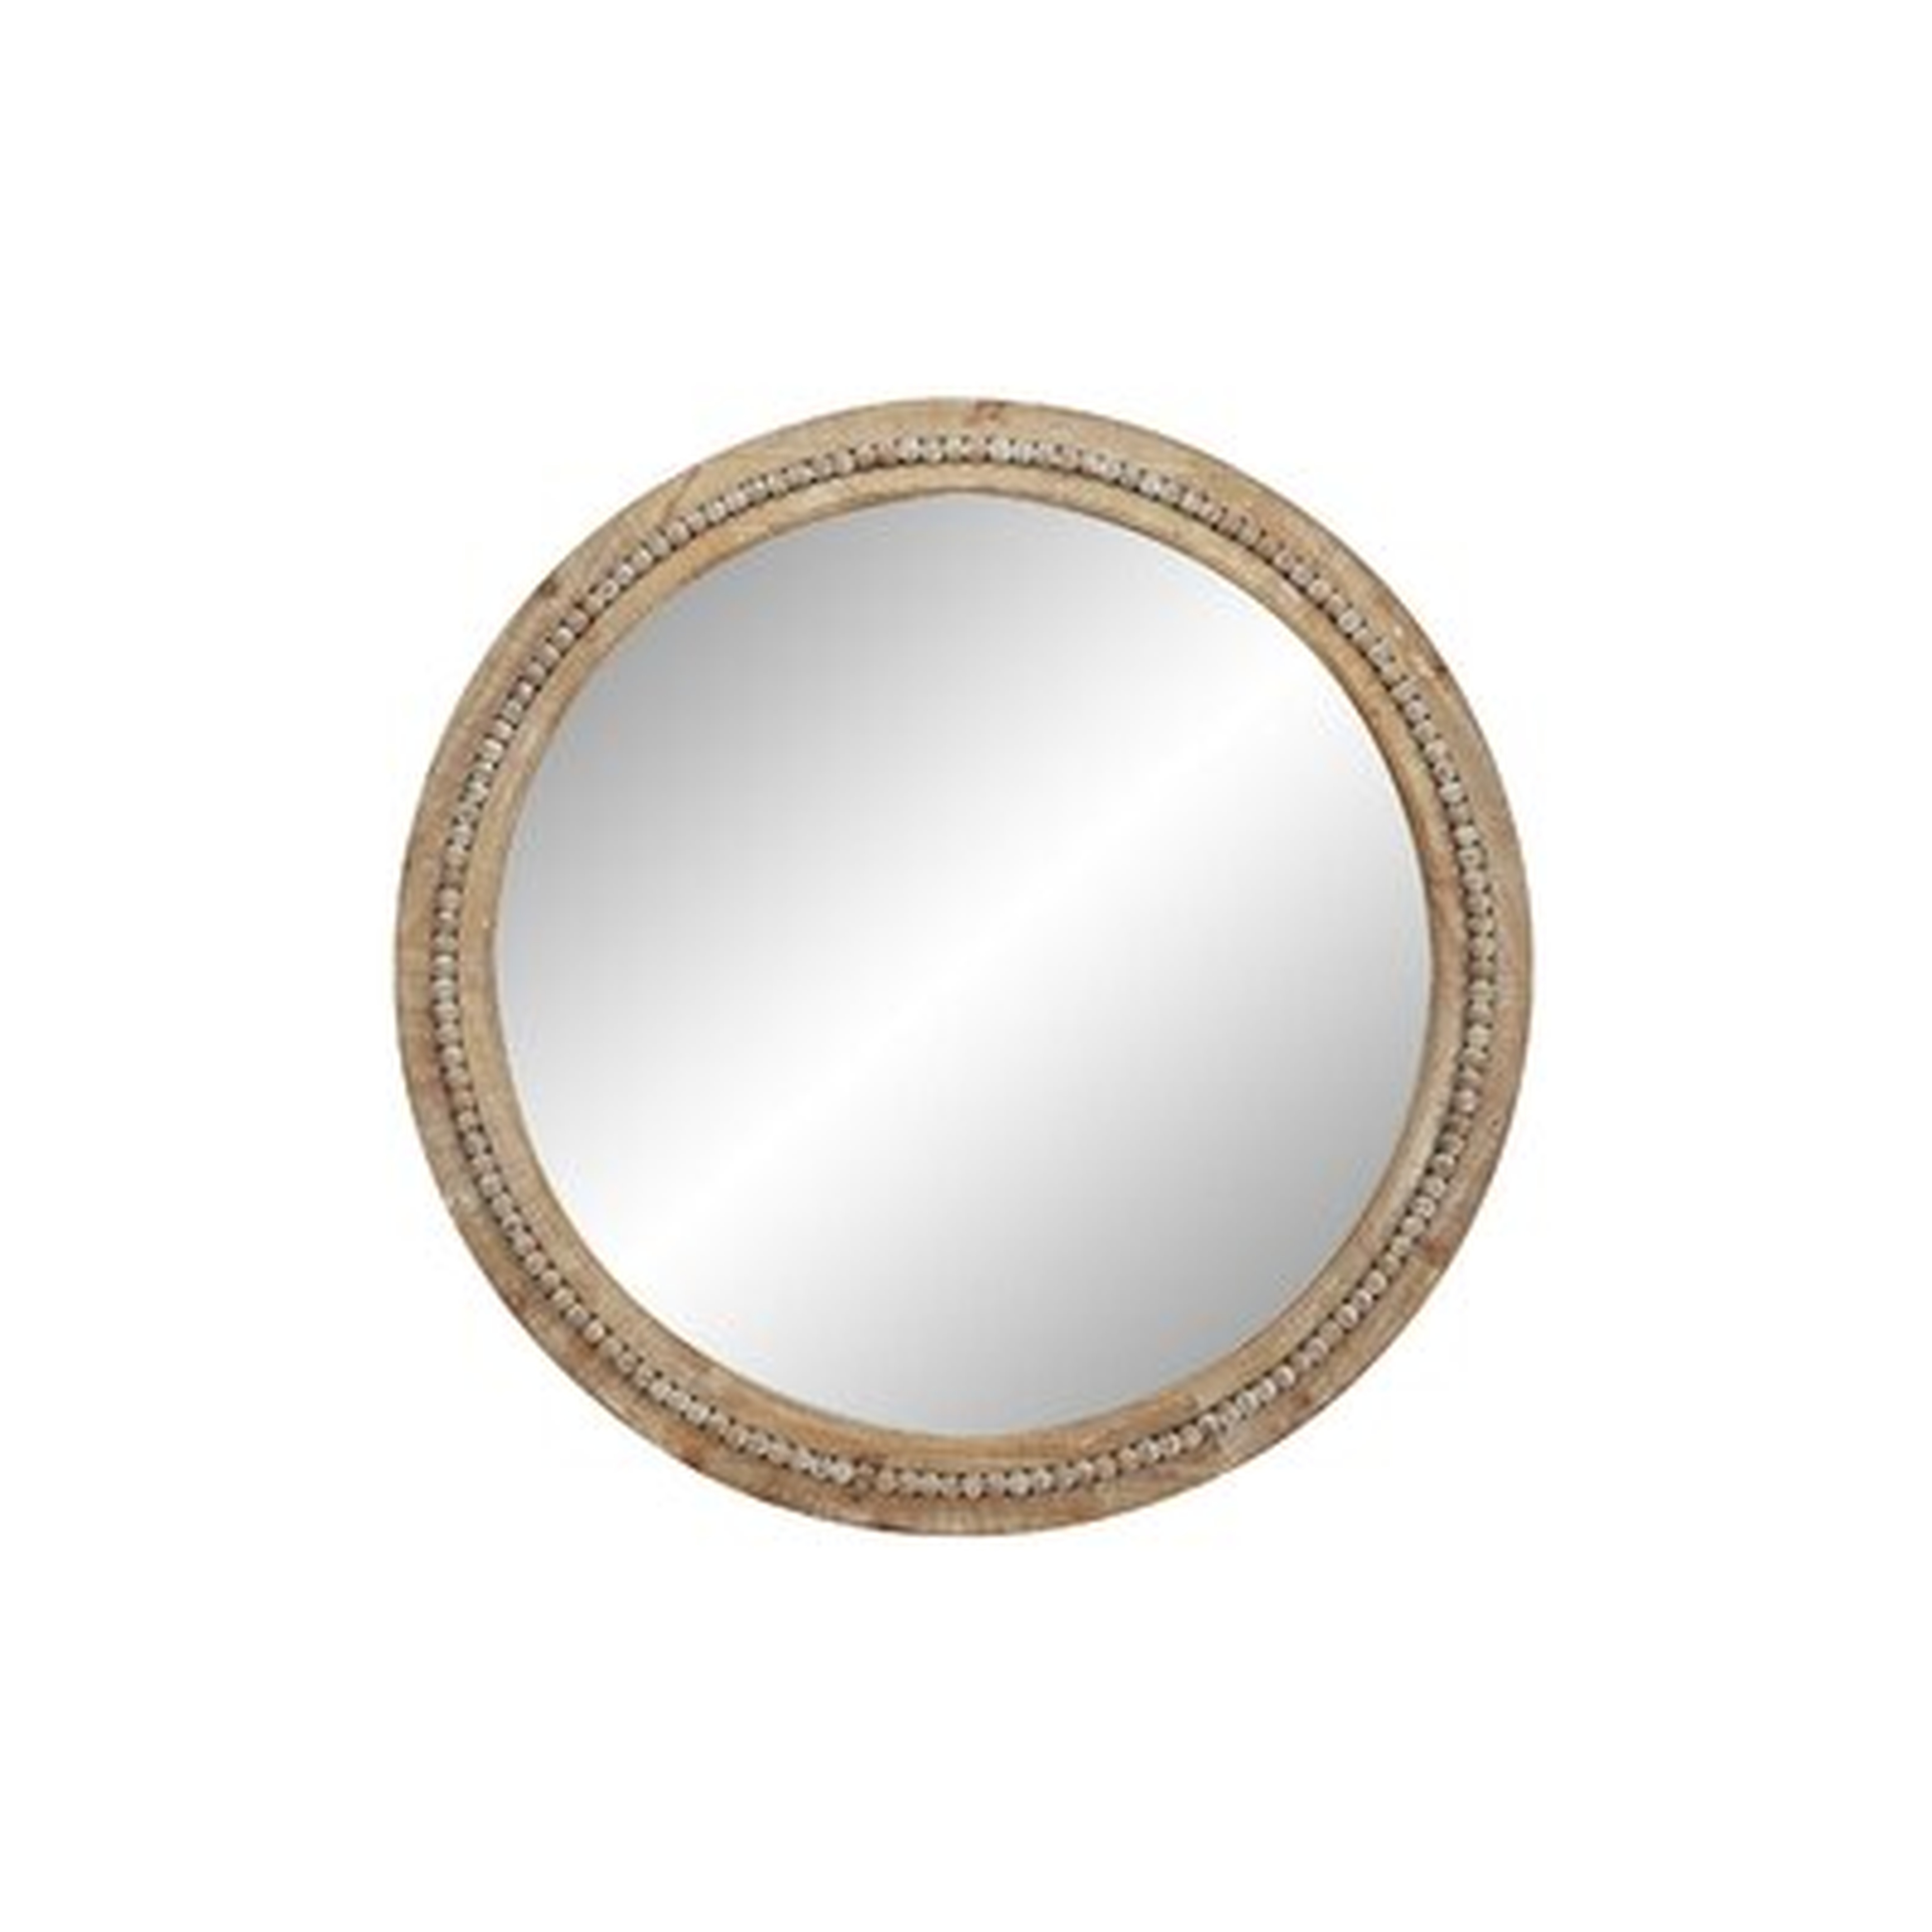 Oakton 36" Large Round Natural Wood Wall Mirror with Decorative Wood Beads - Wayfair